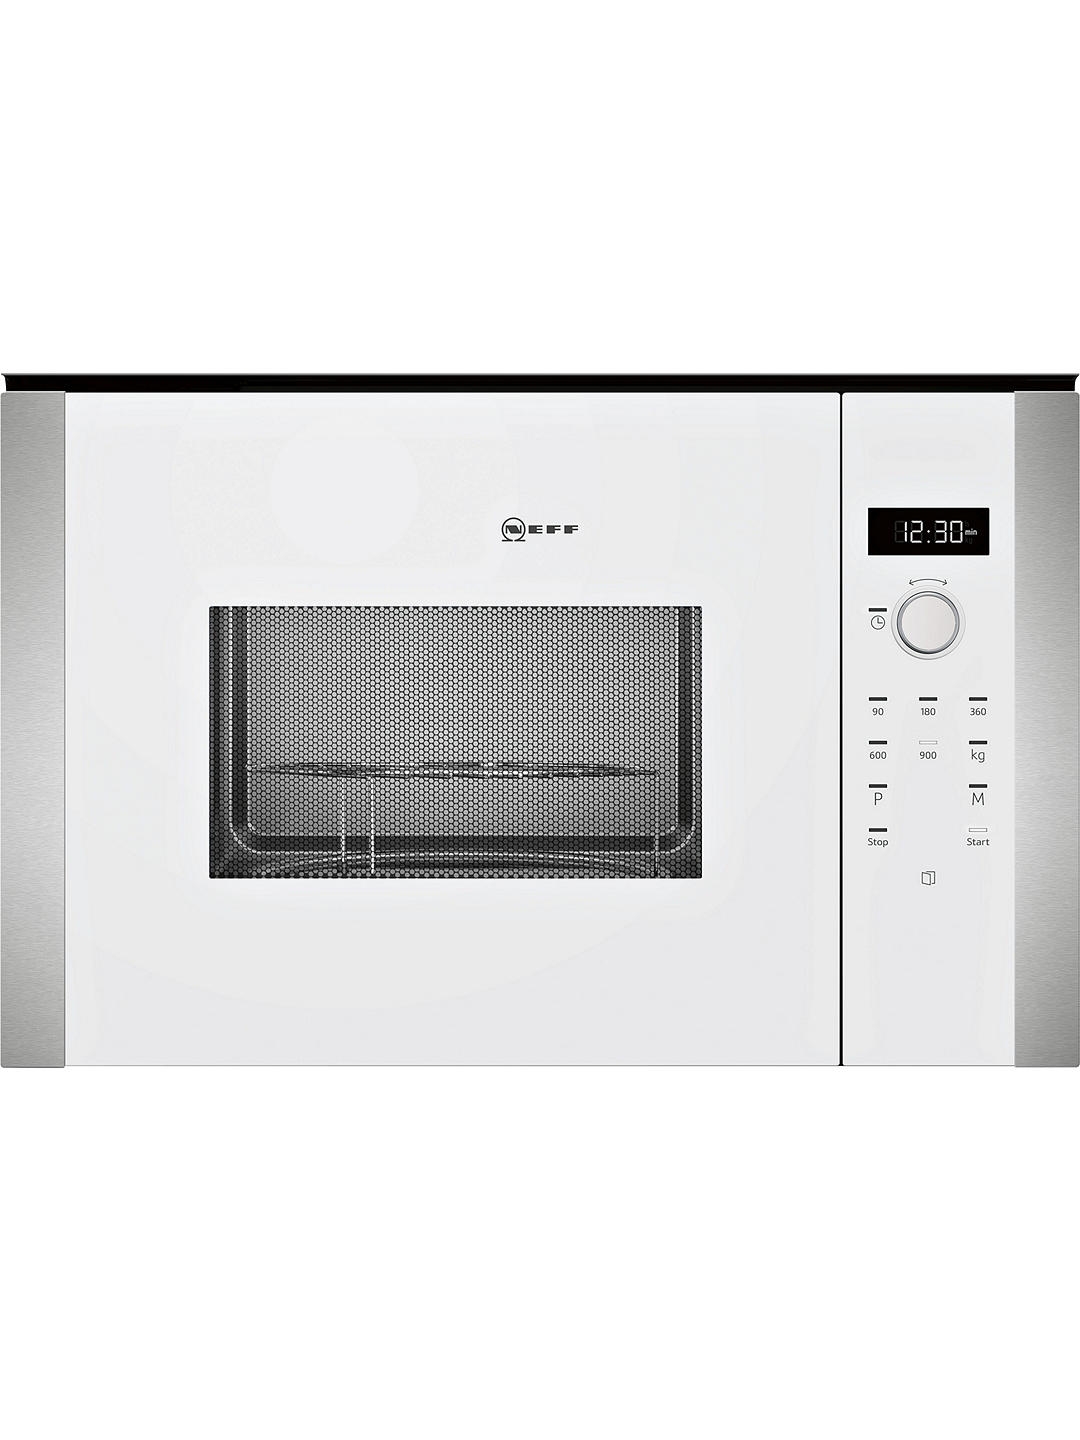 Neff HLAWD53W0B Built-In Microwave White